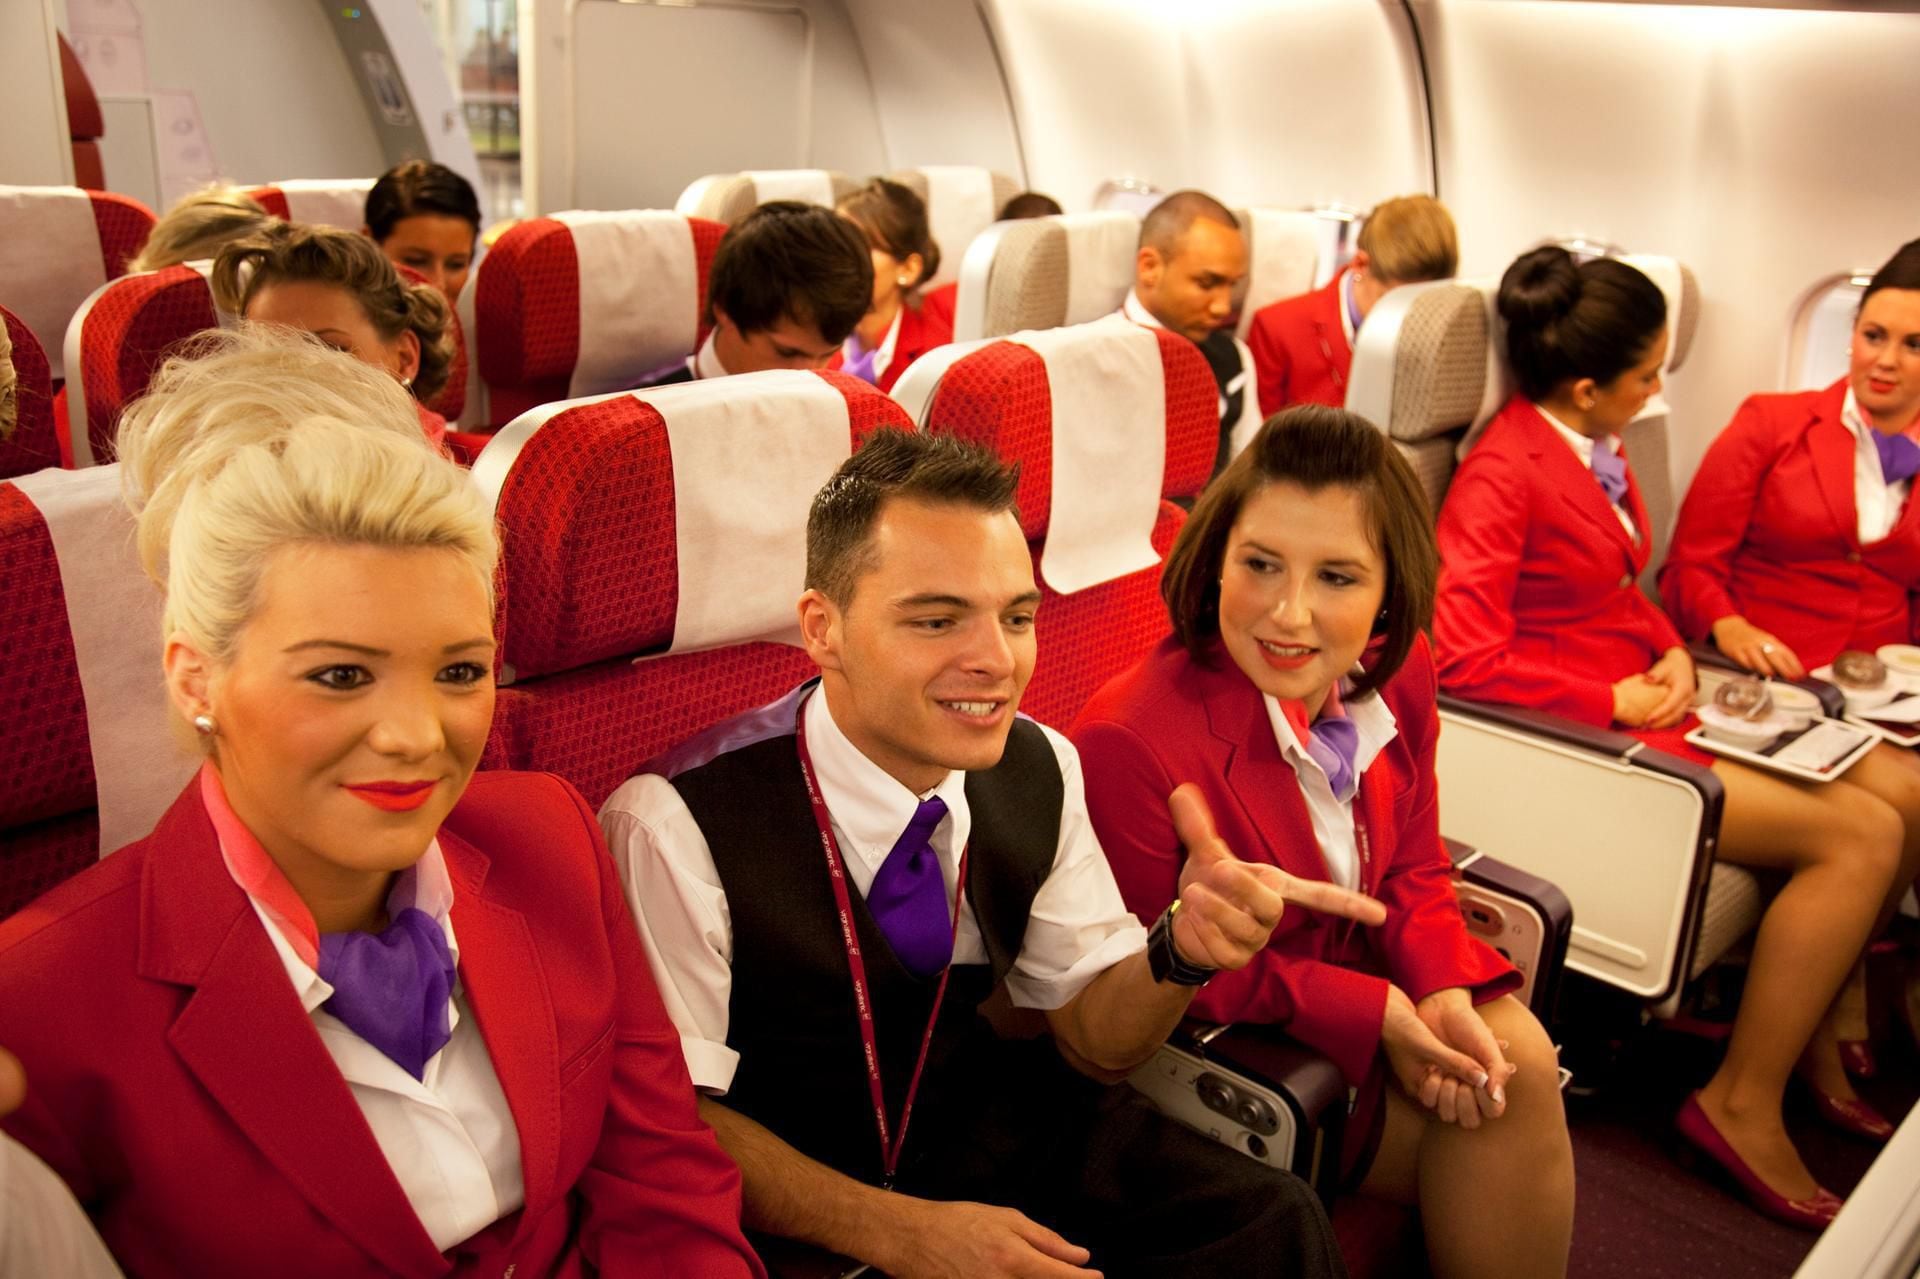 Virgin Atlantic ditches make-up rules for cabin crew